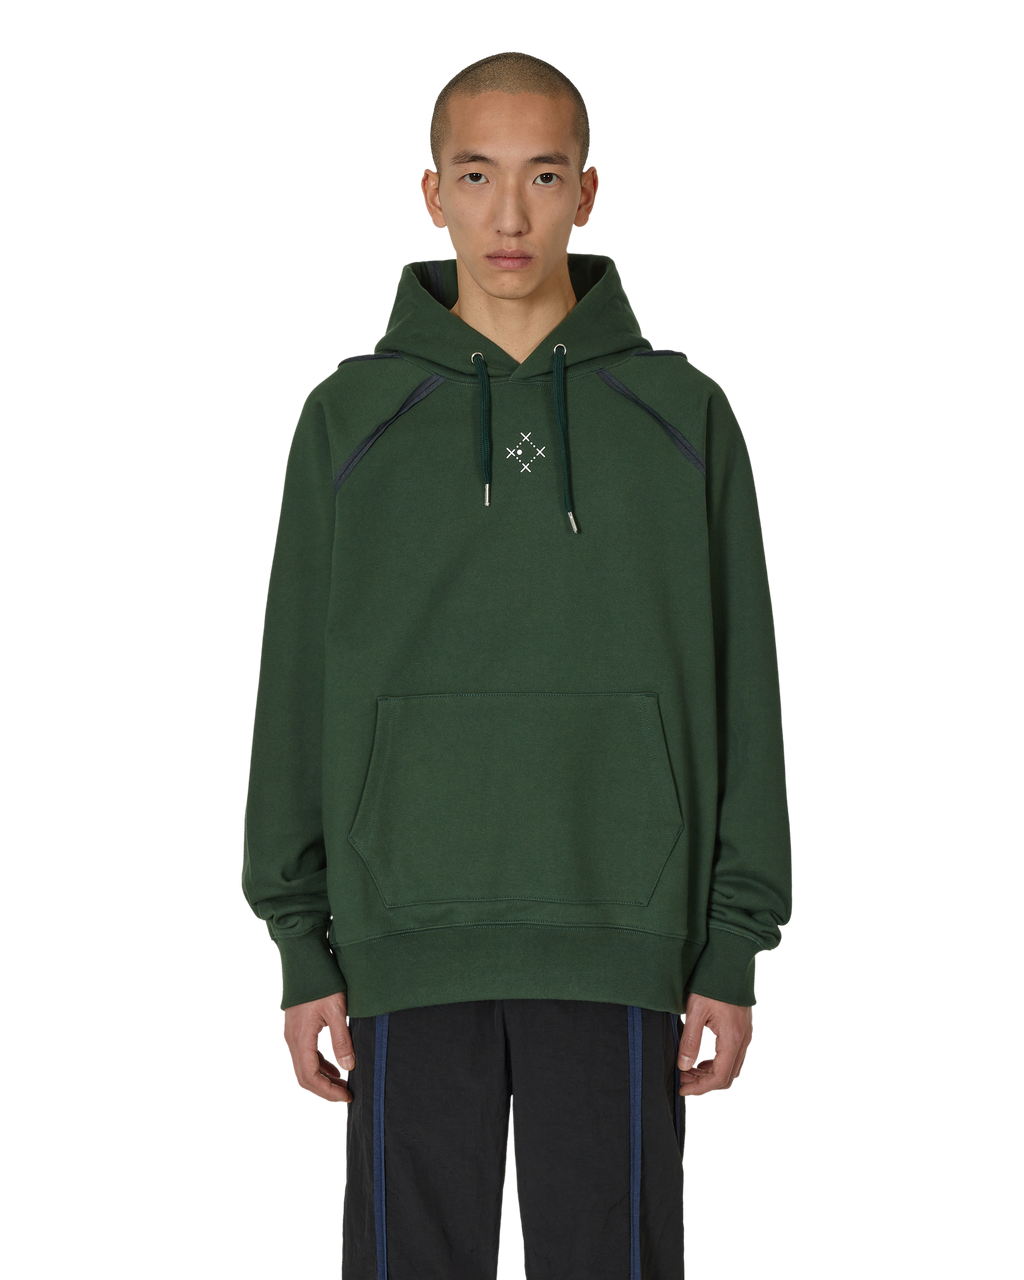 _J.L - A.L_ _J.L-A.L_ x Sound Sports Hoodie J297462-XL-Green front